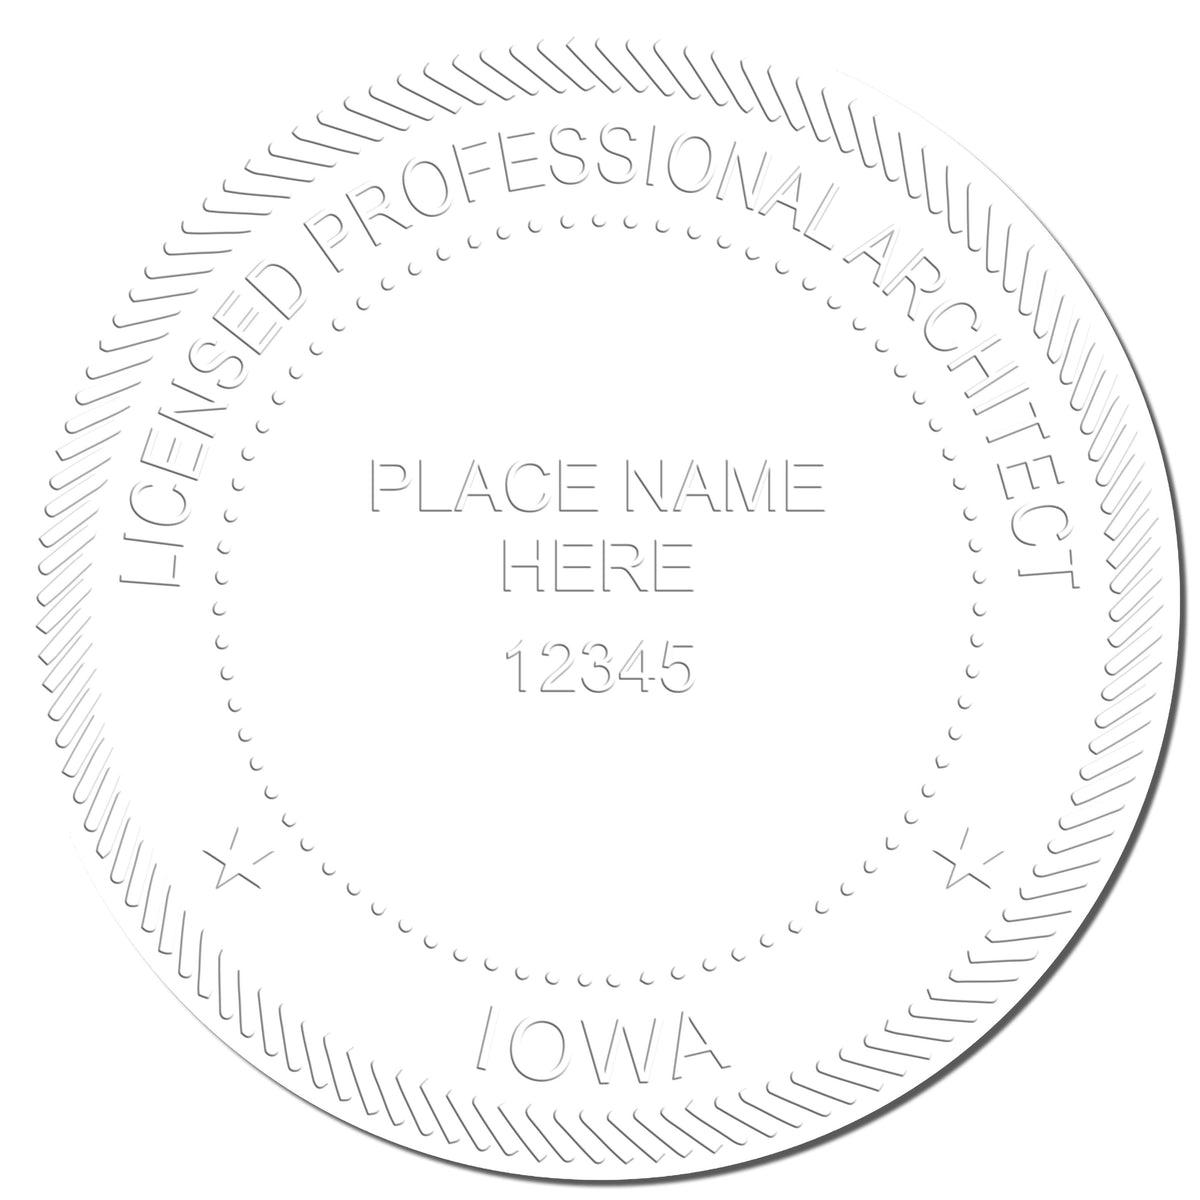 This paper is stamped with a sample imprint of the Hybrid Iowa Architect Seal, signifying its quality and reliability.